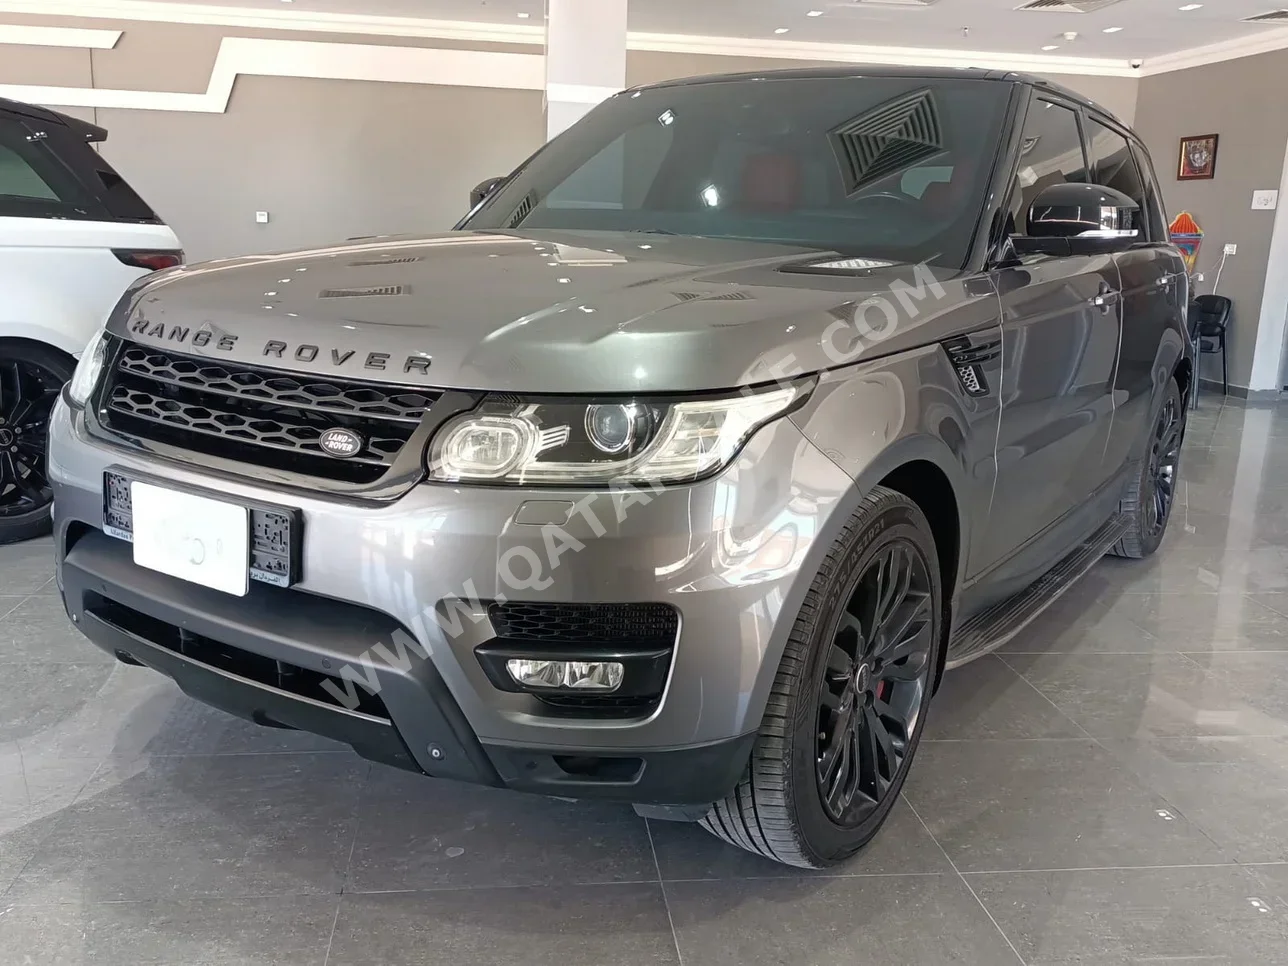 Land Rover  Range Rover  Sport Super charged  2015  Automatic  170,000 Km  8 Cylinder  Four Wheel Drive (4WD)  SUV  Gray